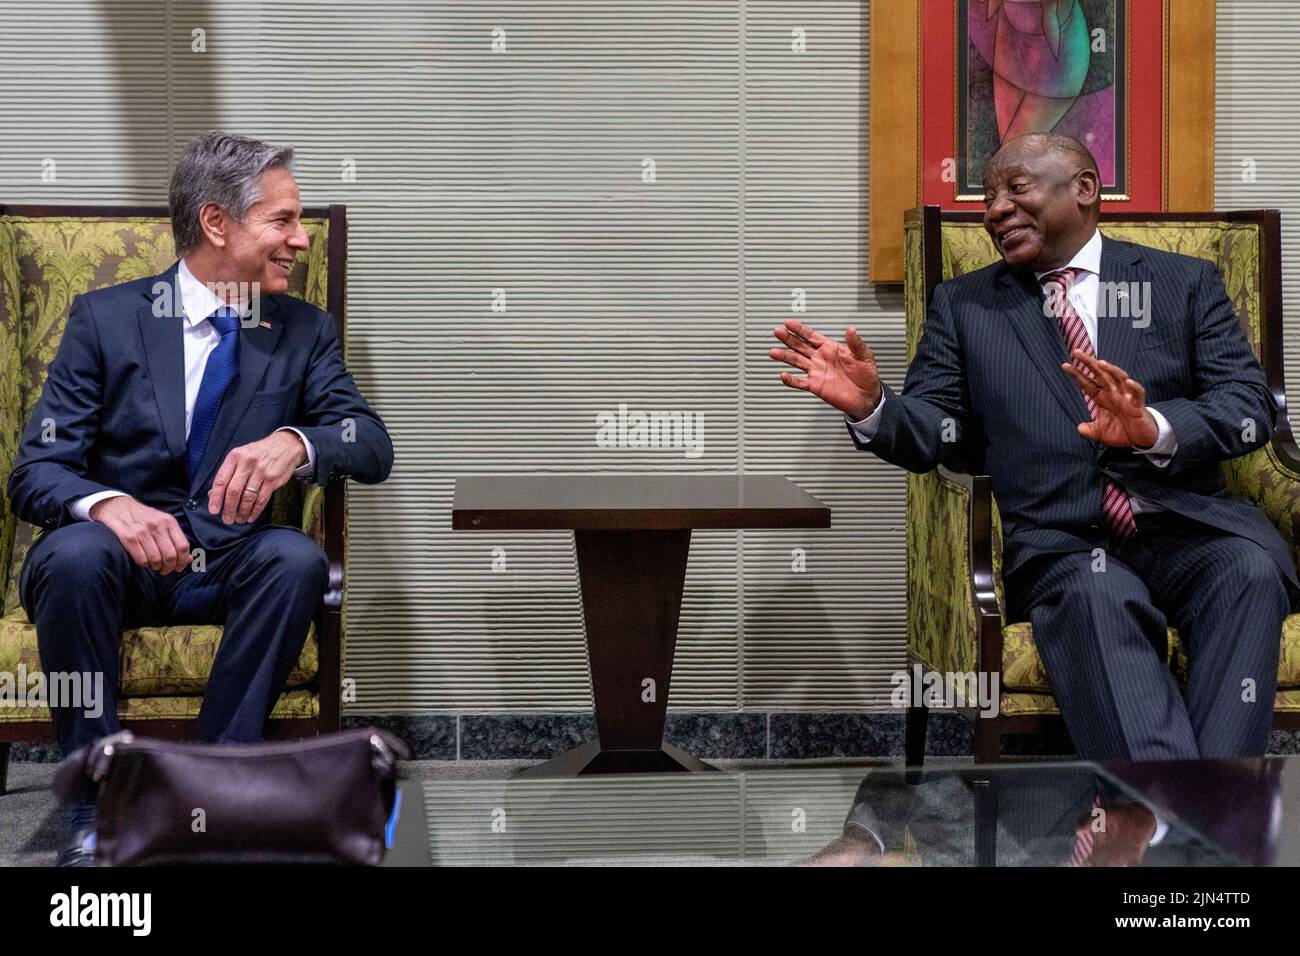 U.S. Secretary of State Antony Blinken meets South Africa's President Cyril Ramaphosa at Waterkloof Airforce Base in Centurion, South Africa, August 9, 2022. Andrew Harnik/Pool via REUTERS Stock Photo